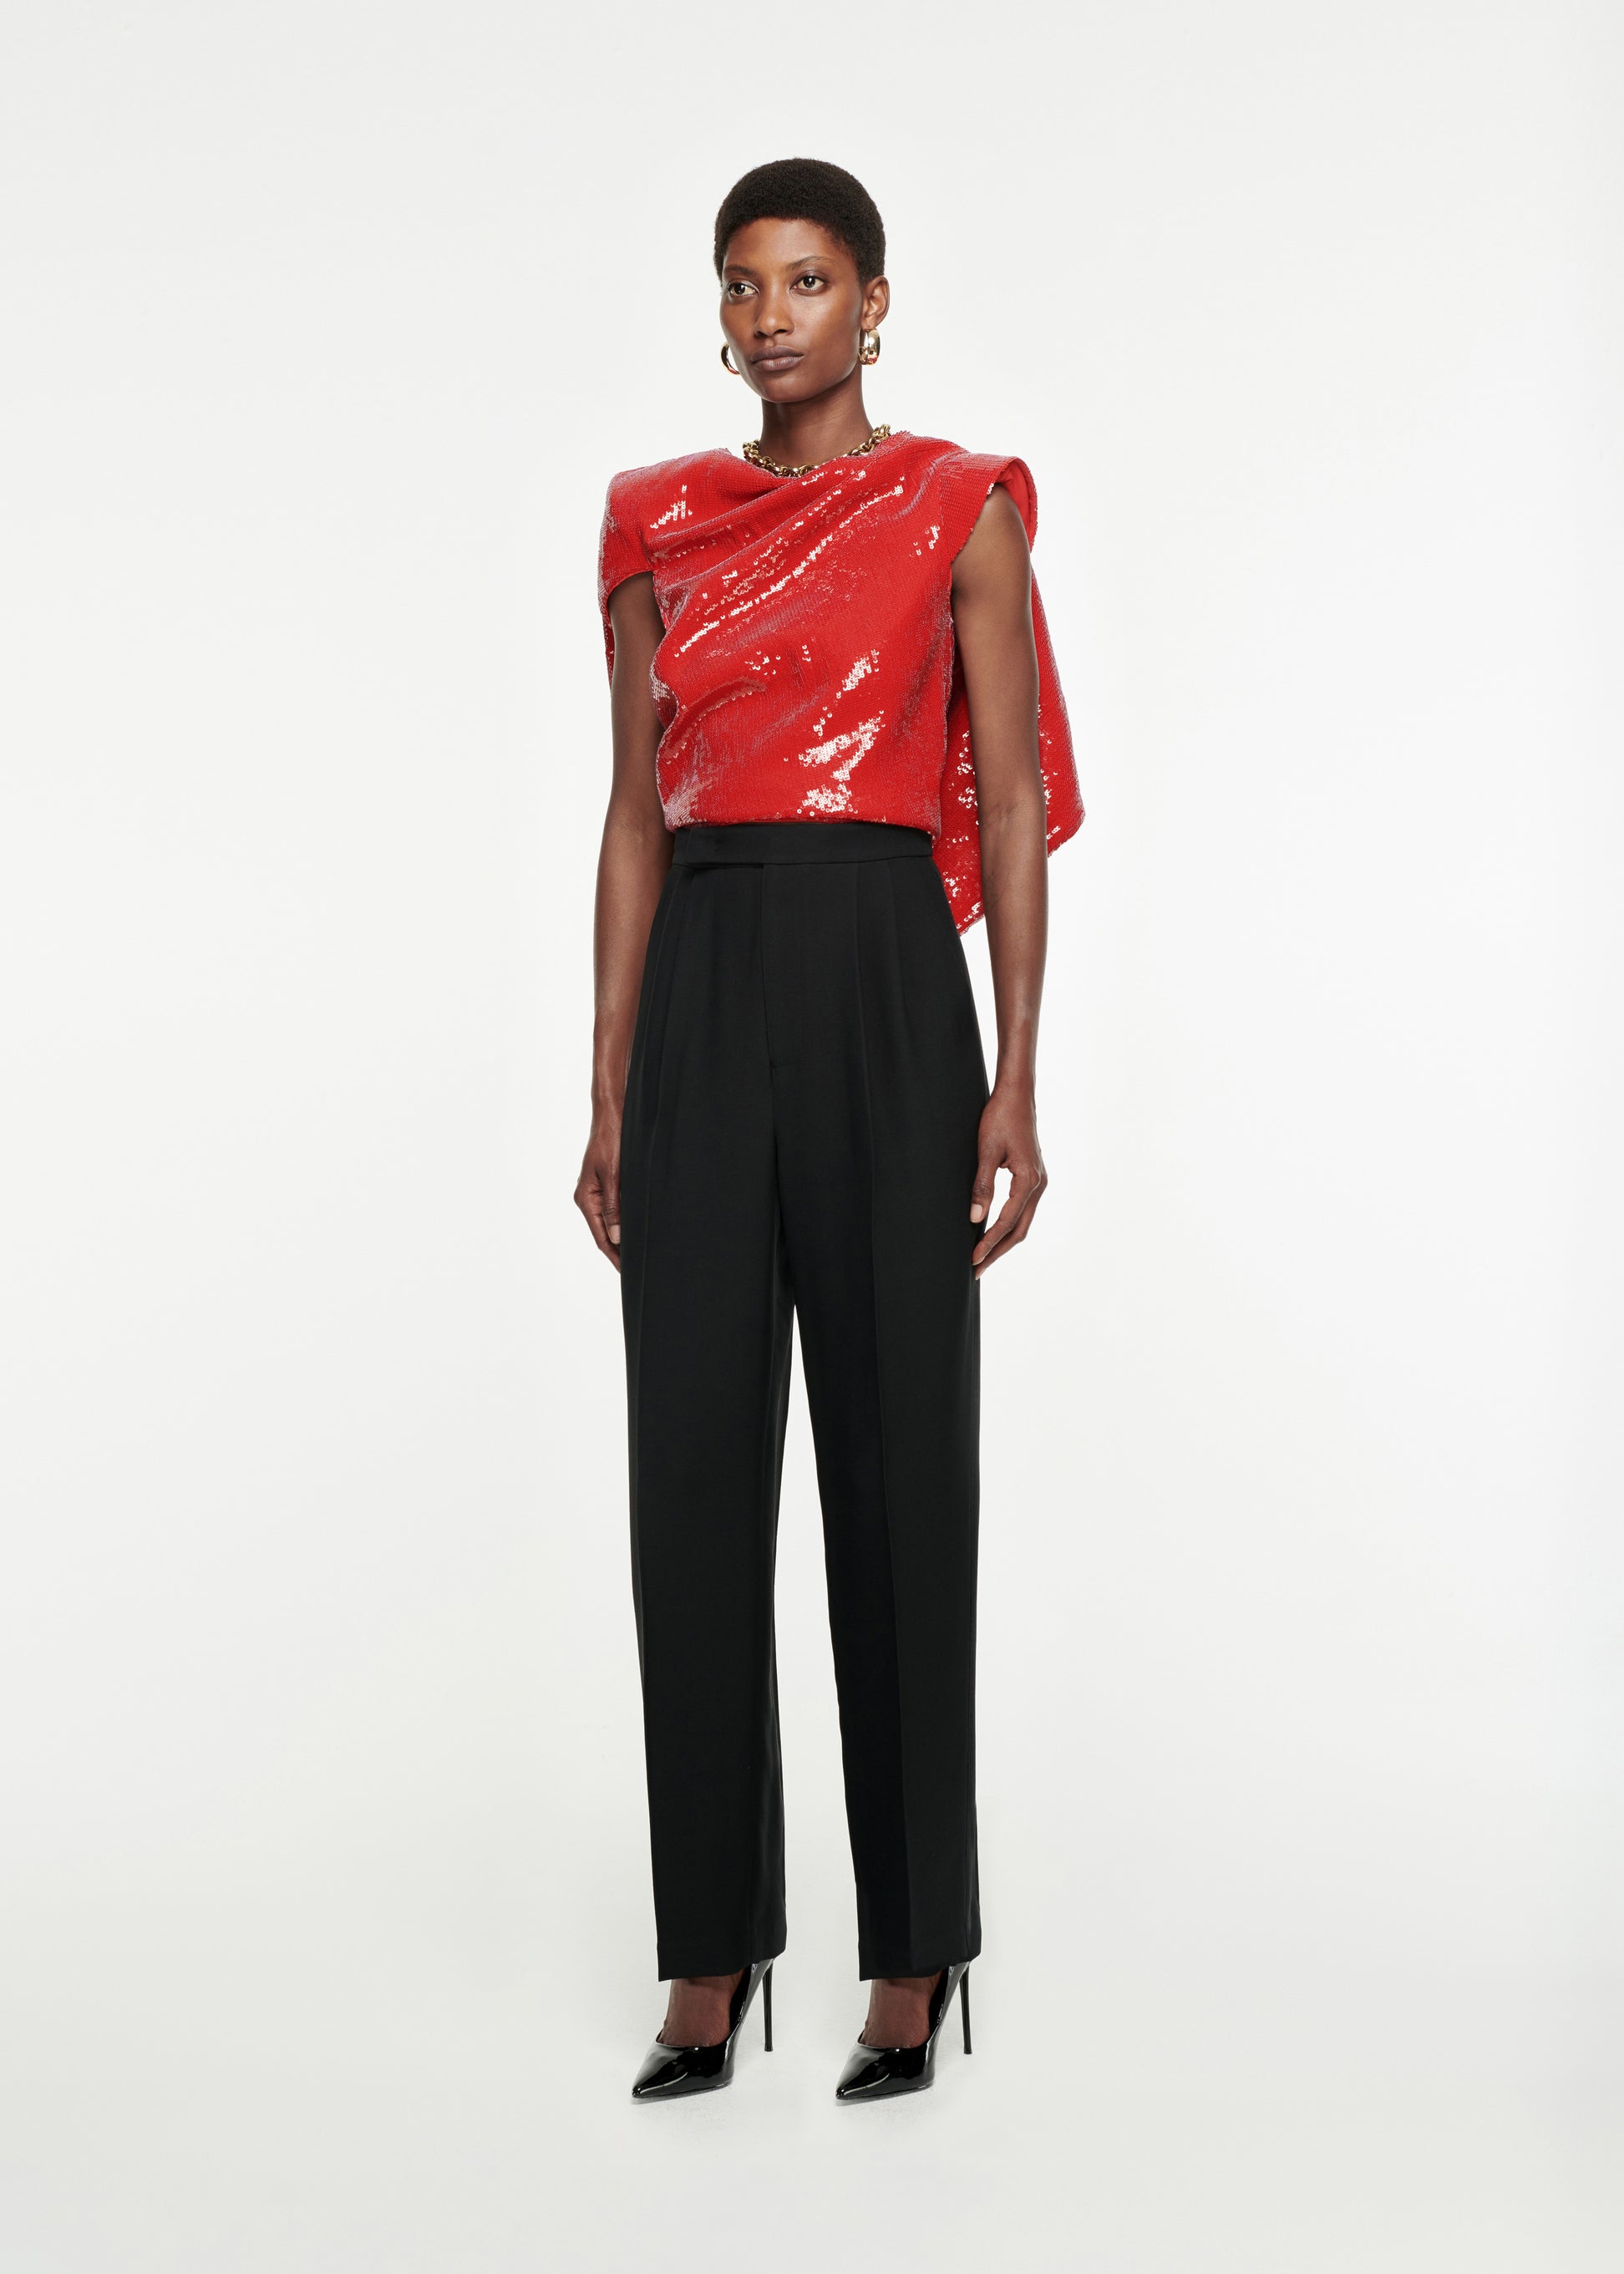 Woman wearing the Draped Sequin Top in Red